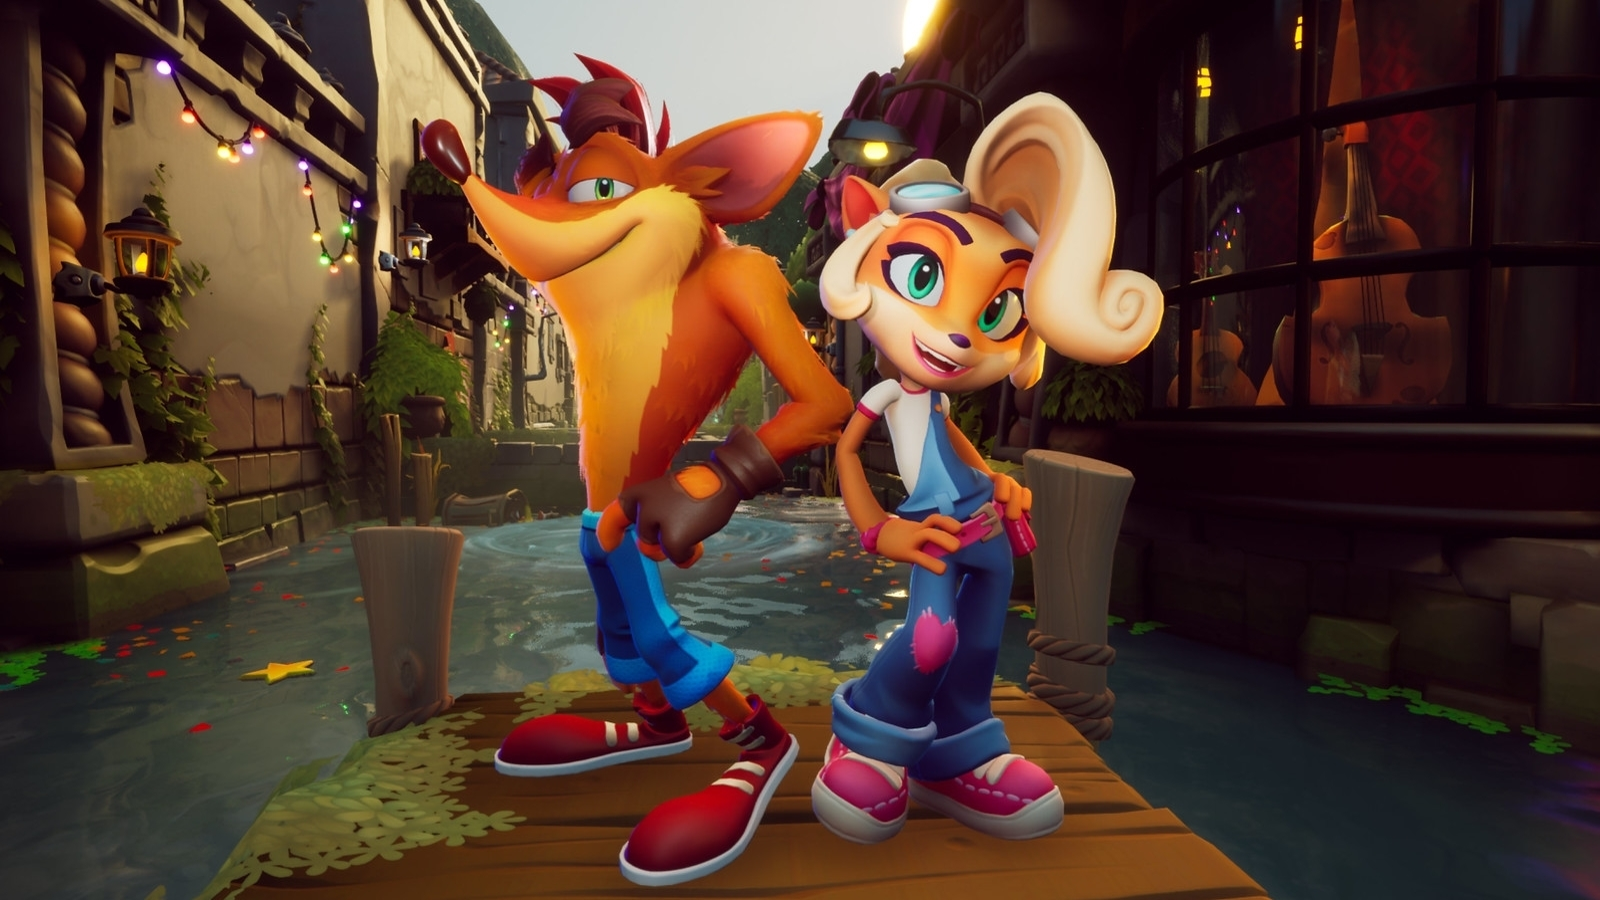 Crash Bandicoot 4: It's About coming to Xbox Series X/S Nintendo Switch in March, PC later | Eurogamer.net